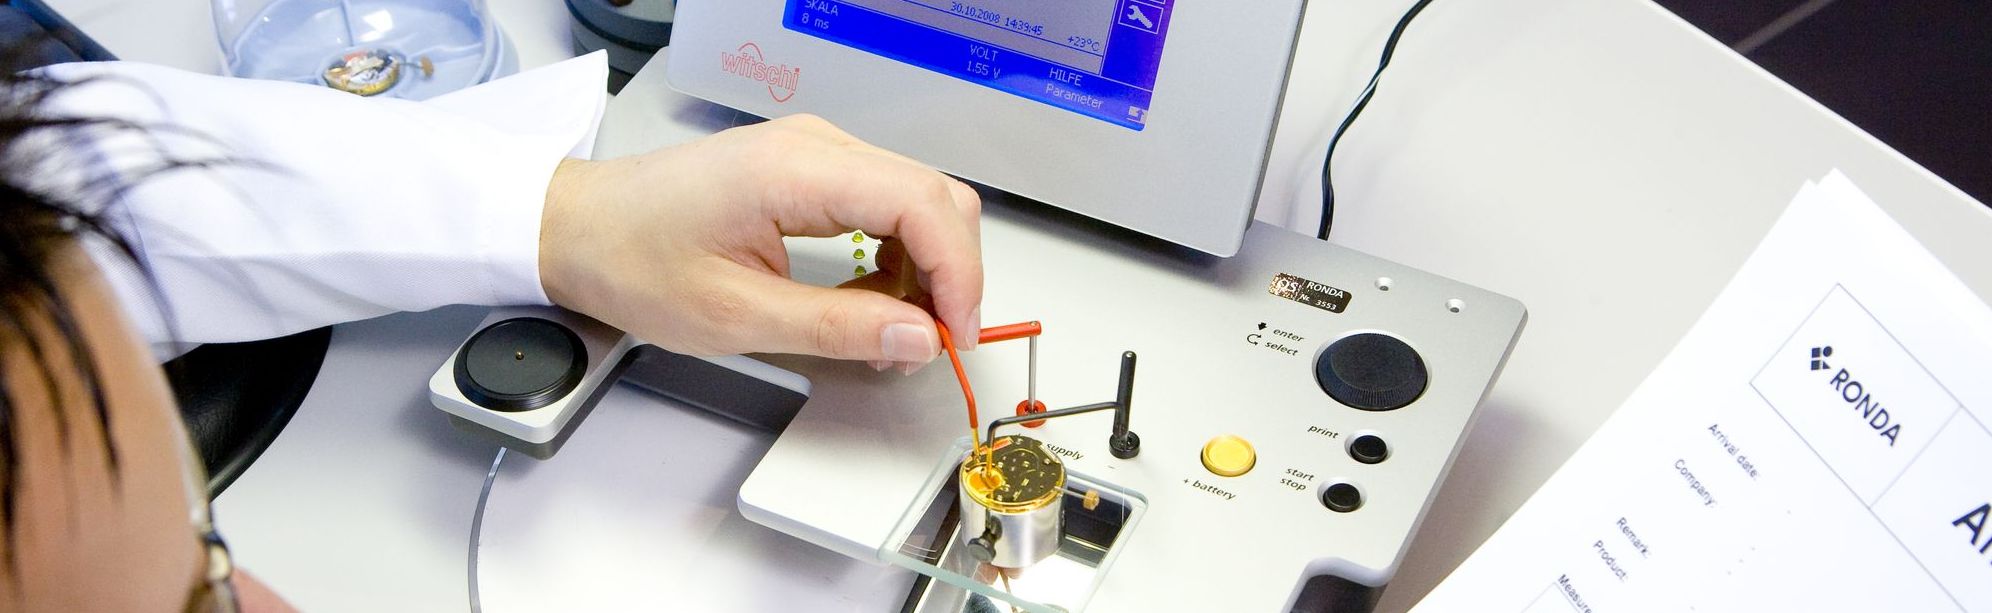 Technical measurement during a Ronda seminar for watch movements.